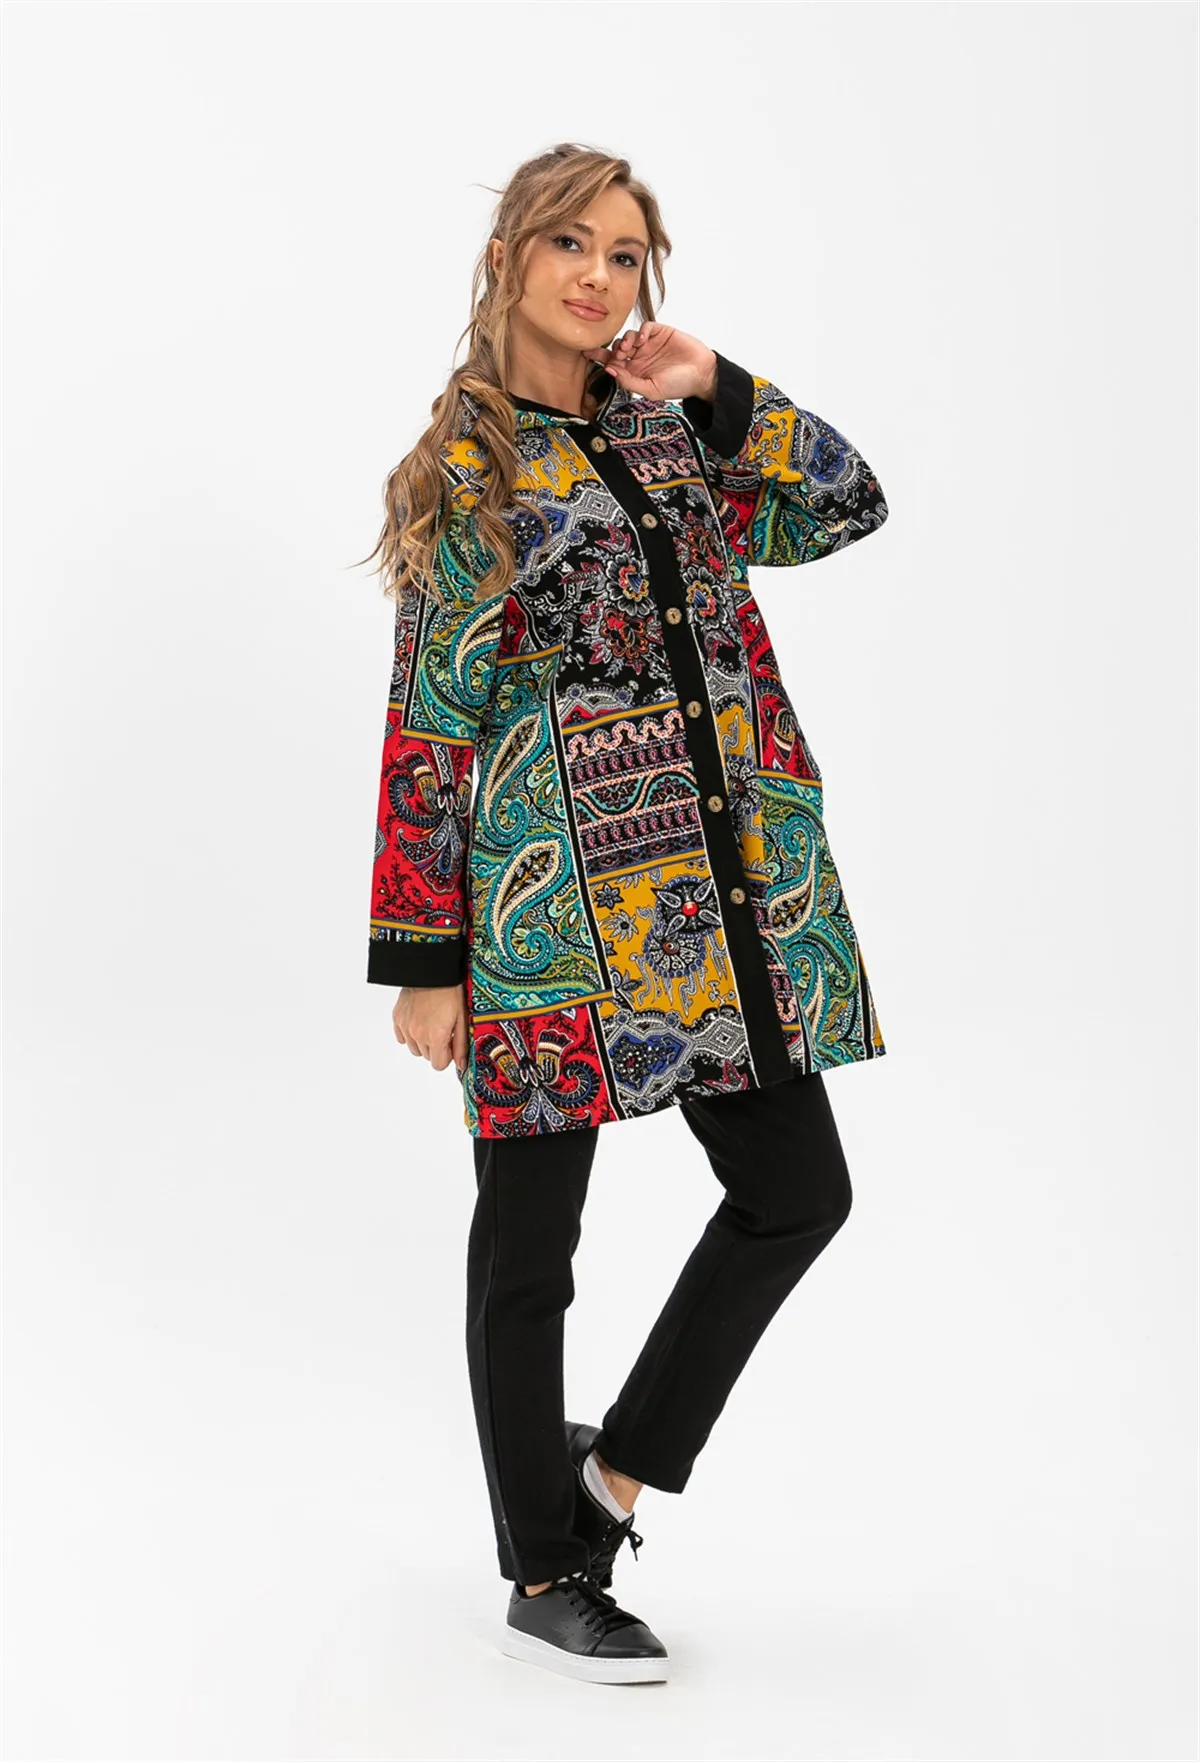 Handmade Flannel Fabric Paisley Patterned Winter Multicolor Hooded Women's Jacket 2022 New Fashion Outwear 2022 fashion glass green paisley floral fringe viscose shawl scarf high quality print wrap pashmina stole muslim hijab 180 90cm